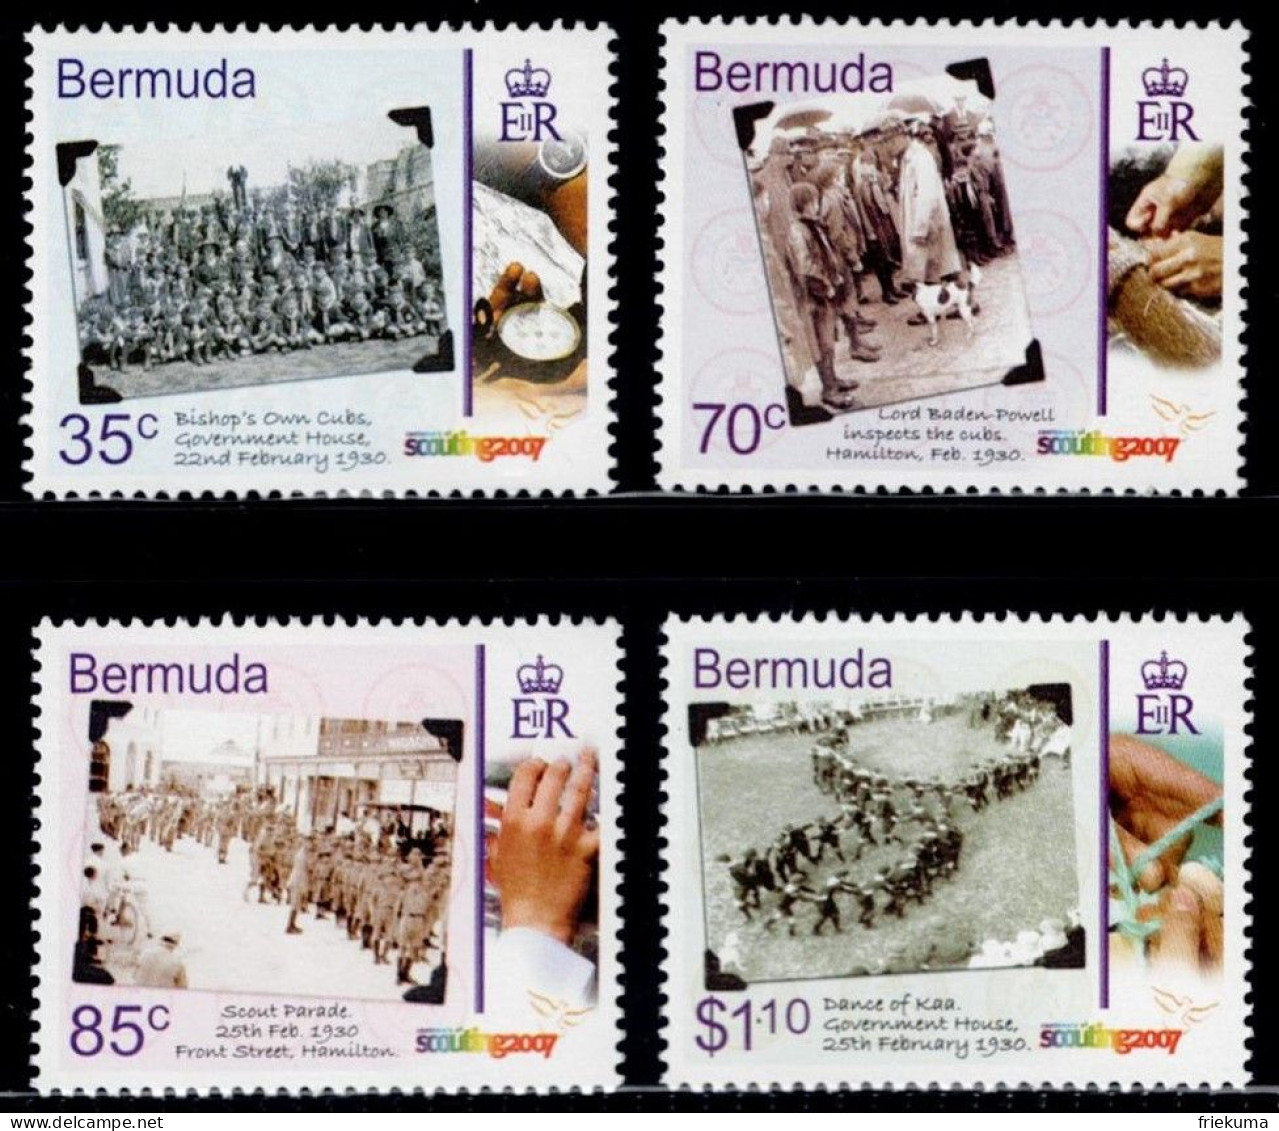 Bermuda 2007, 100 Years Of The Scout Movement: Wolves, Parade In Hamilton, Kaa Dance, Etc. MiNr. 940-943 - Nuevos